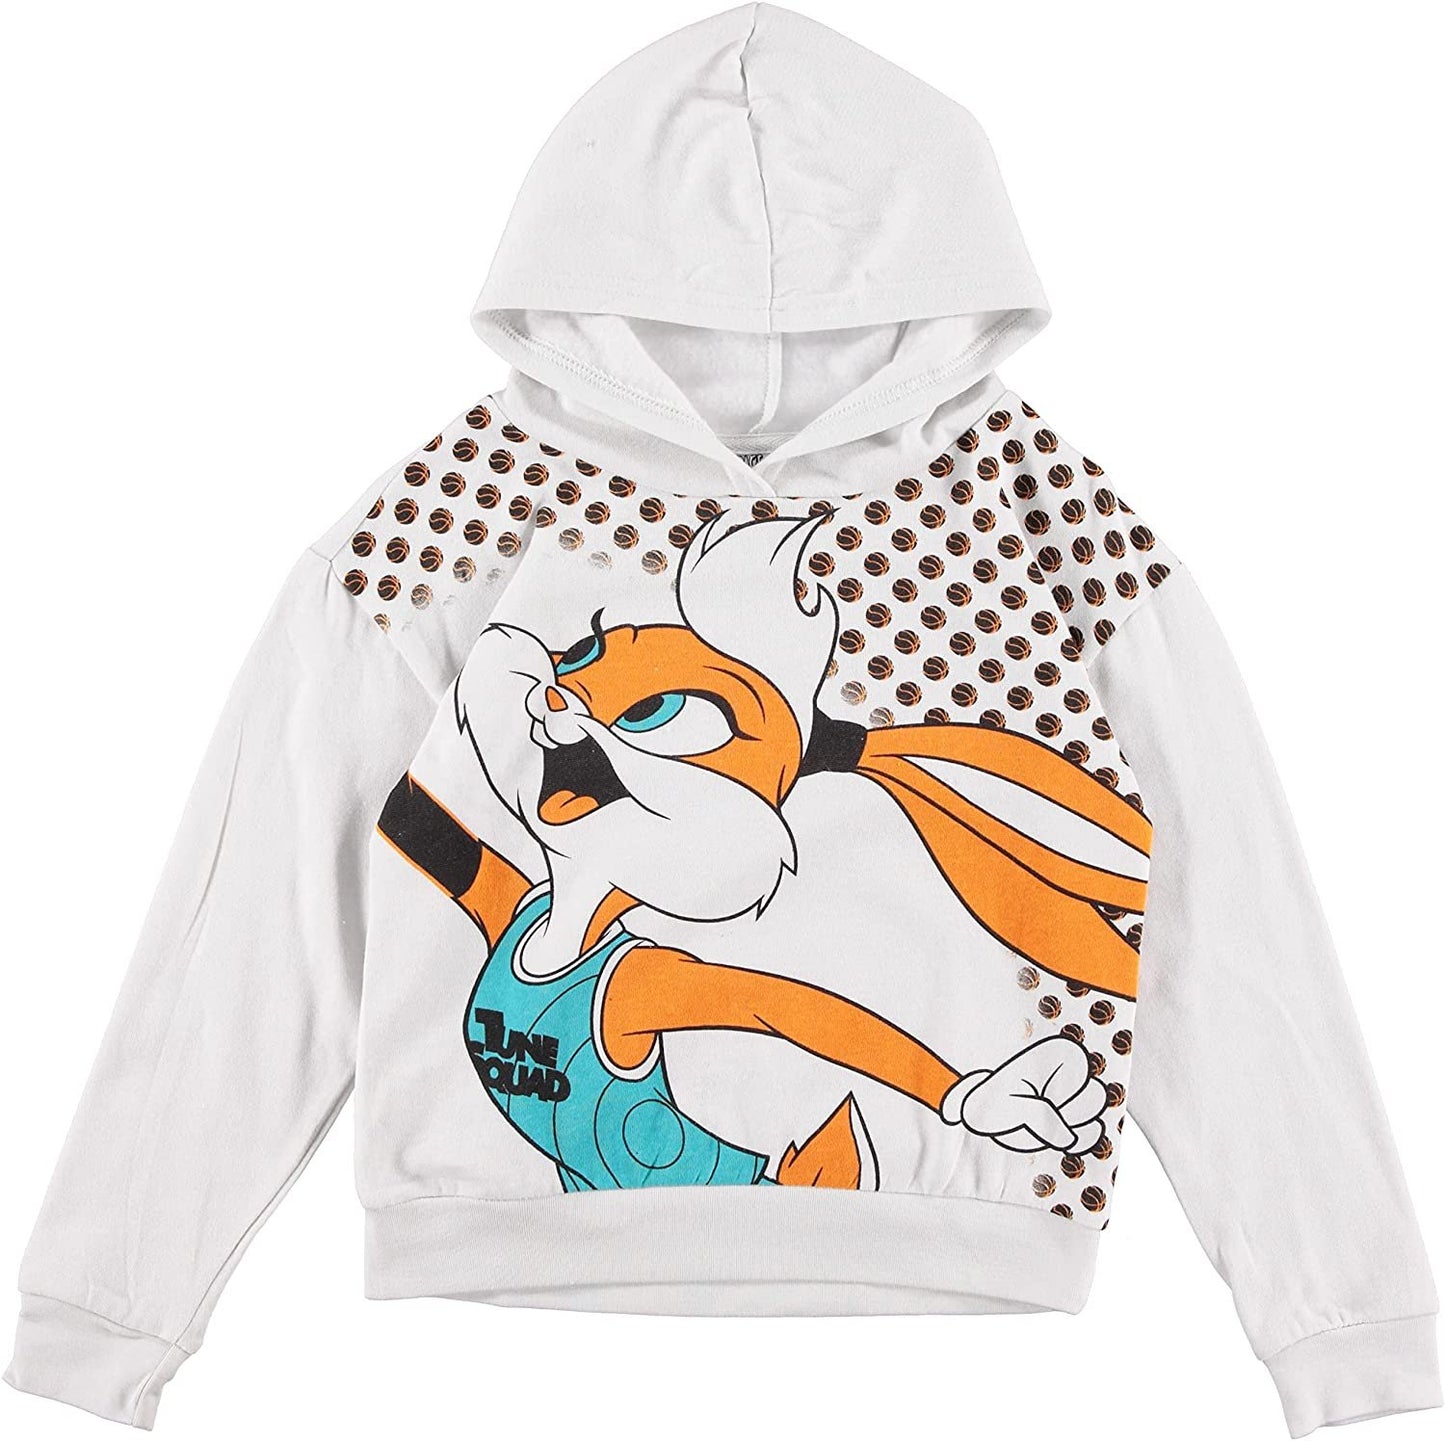 FREEZE Girls' Space Jam Lola Hoodie and Jogger Clothing Set - Space Jam A New Legacy Pullover Hoodie Sizes 4-16